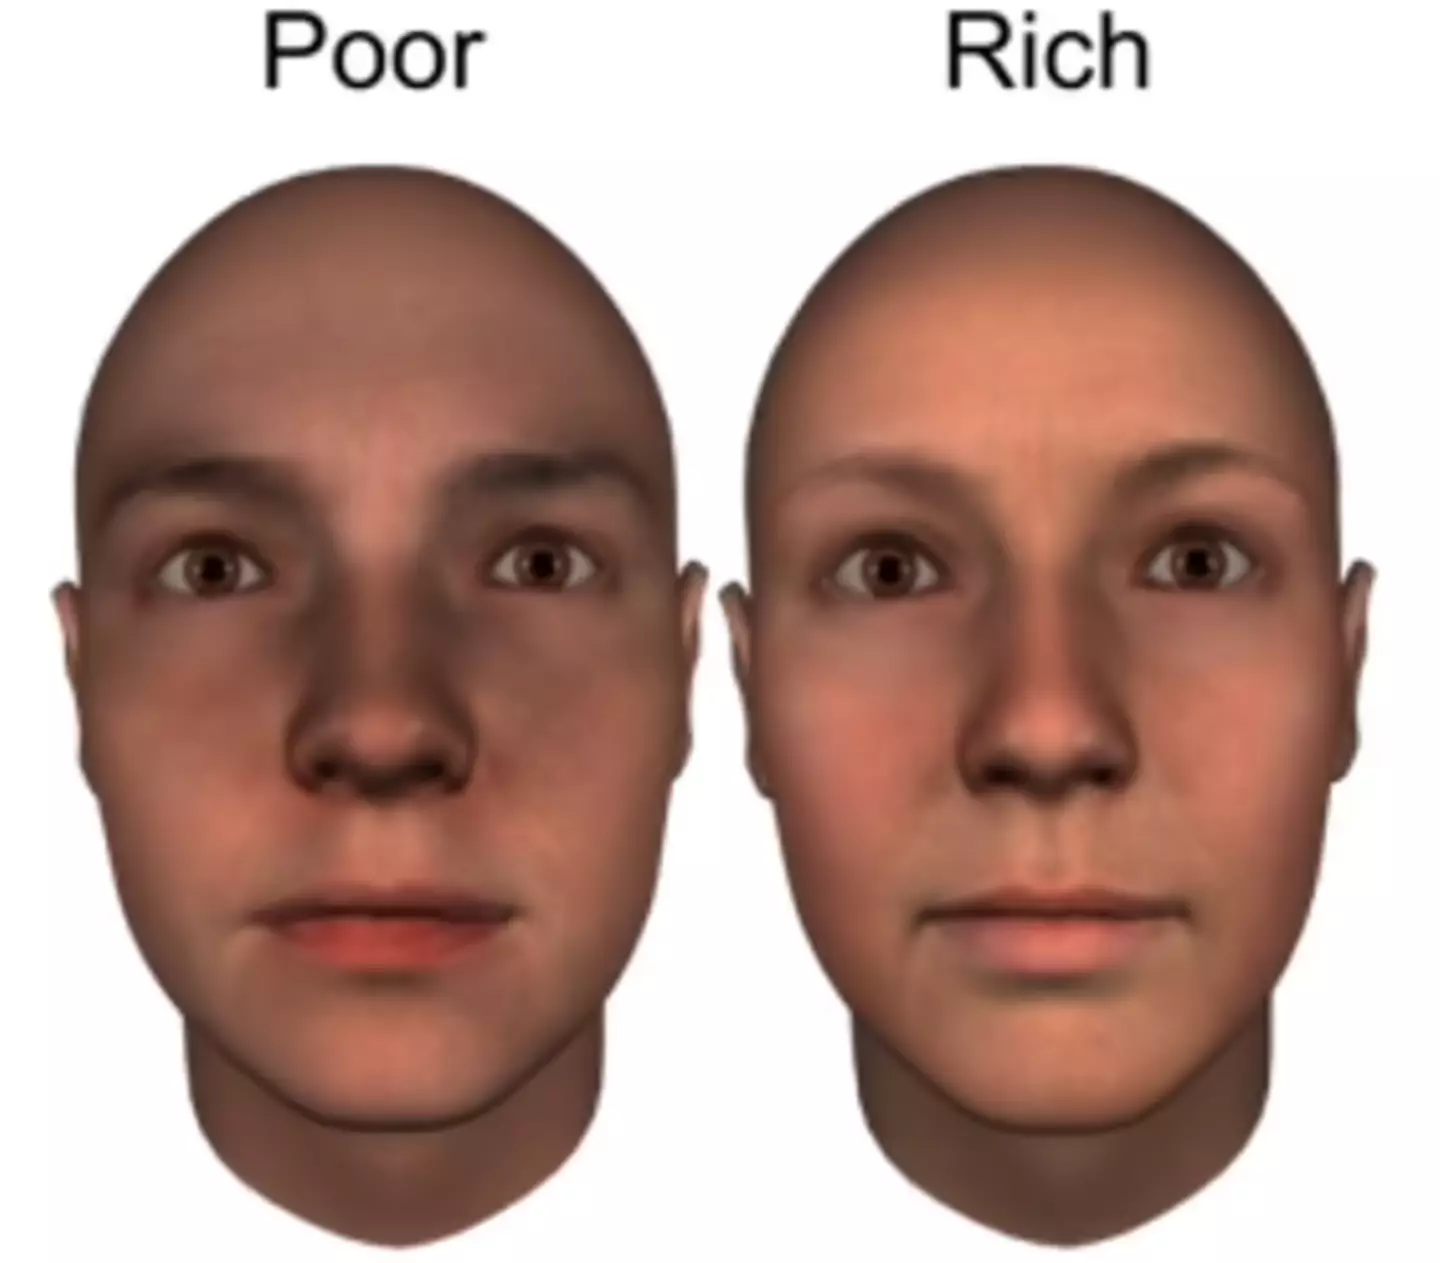 'Poor' face (left) and 'rich' face (right) comparison.